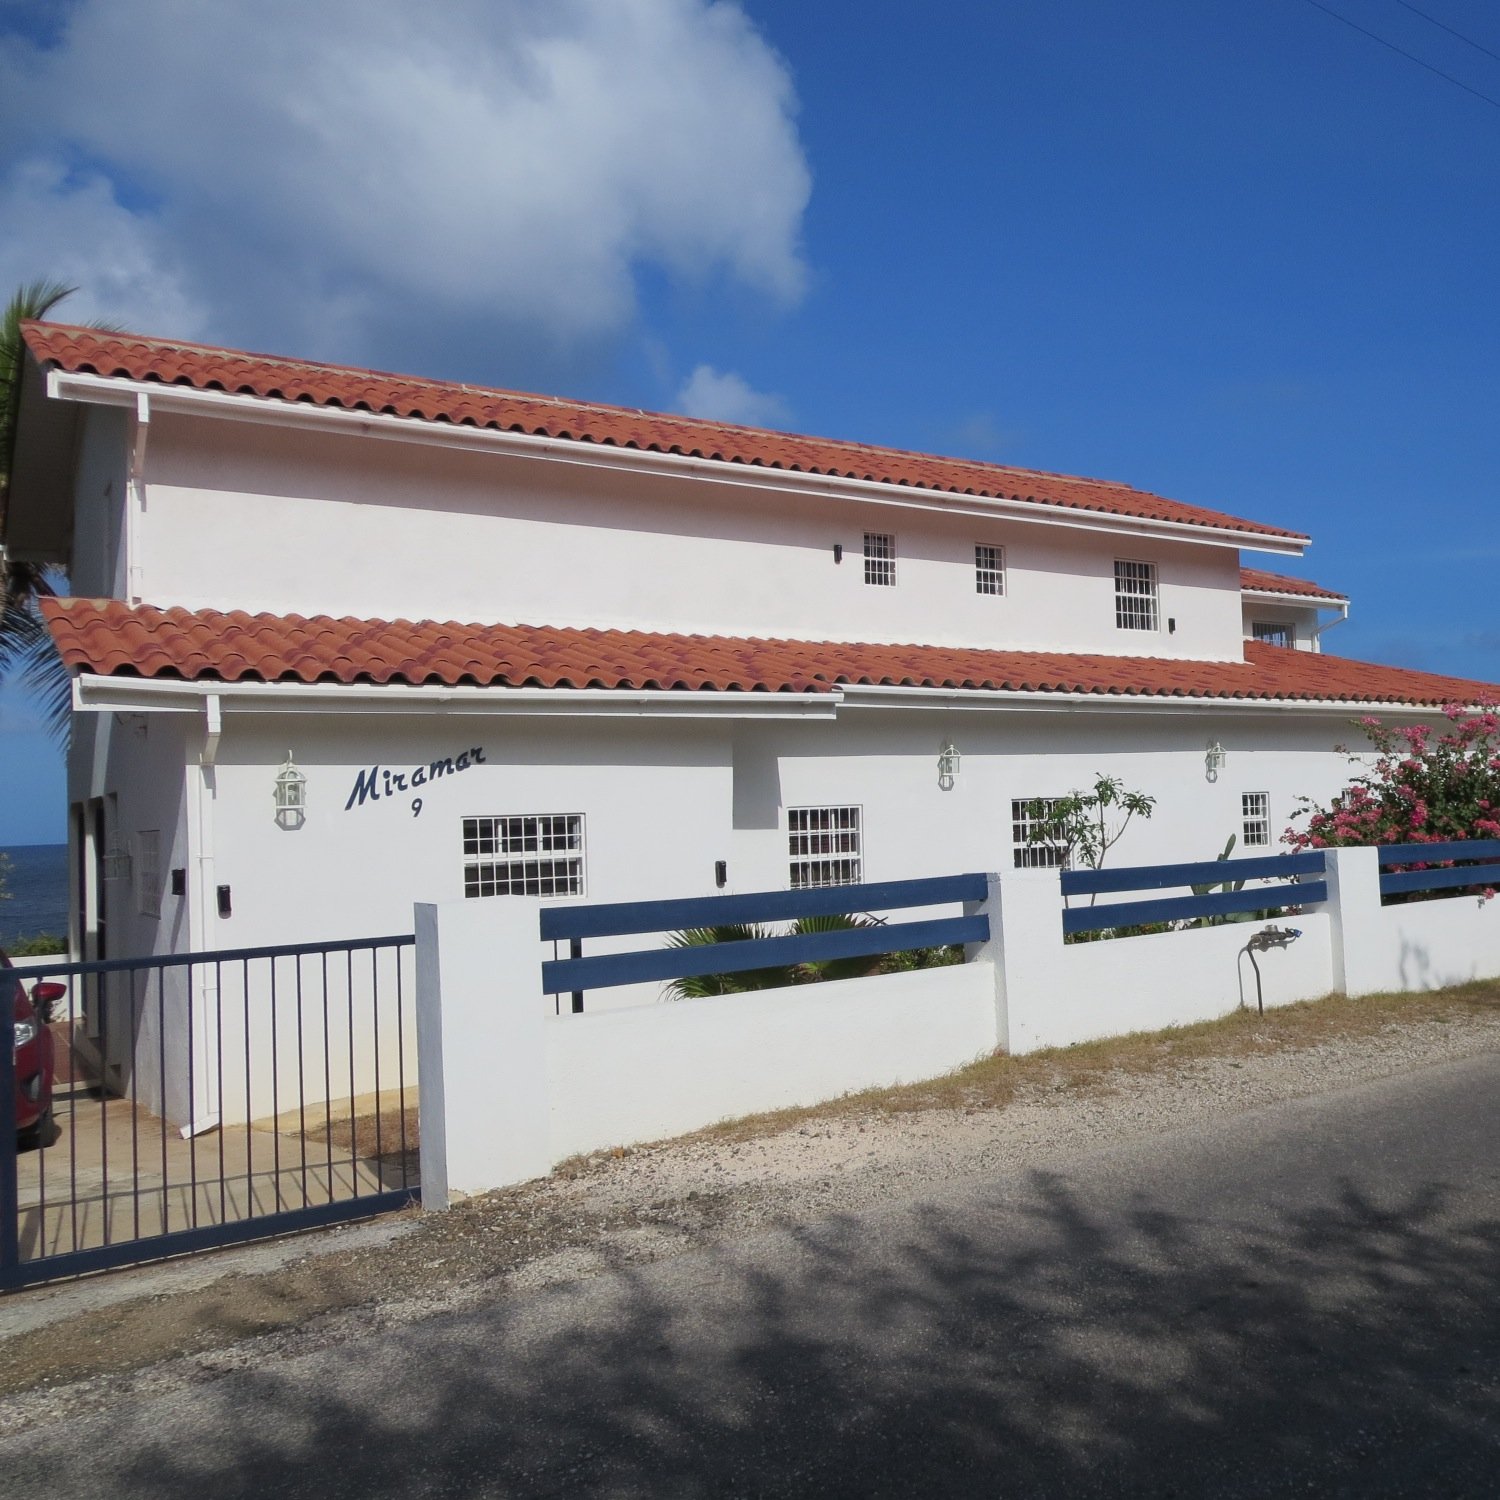 Miramar is a holiday home located on the most coveted bay on the Caribbean island of #Curacao #Westpunt http://t.co/kLozMhxOJK